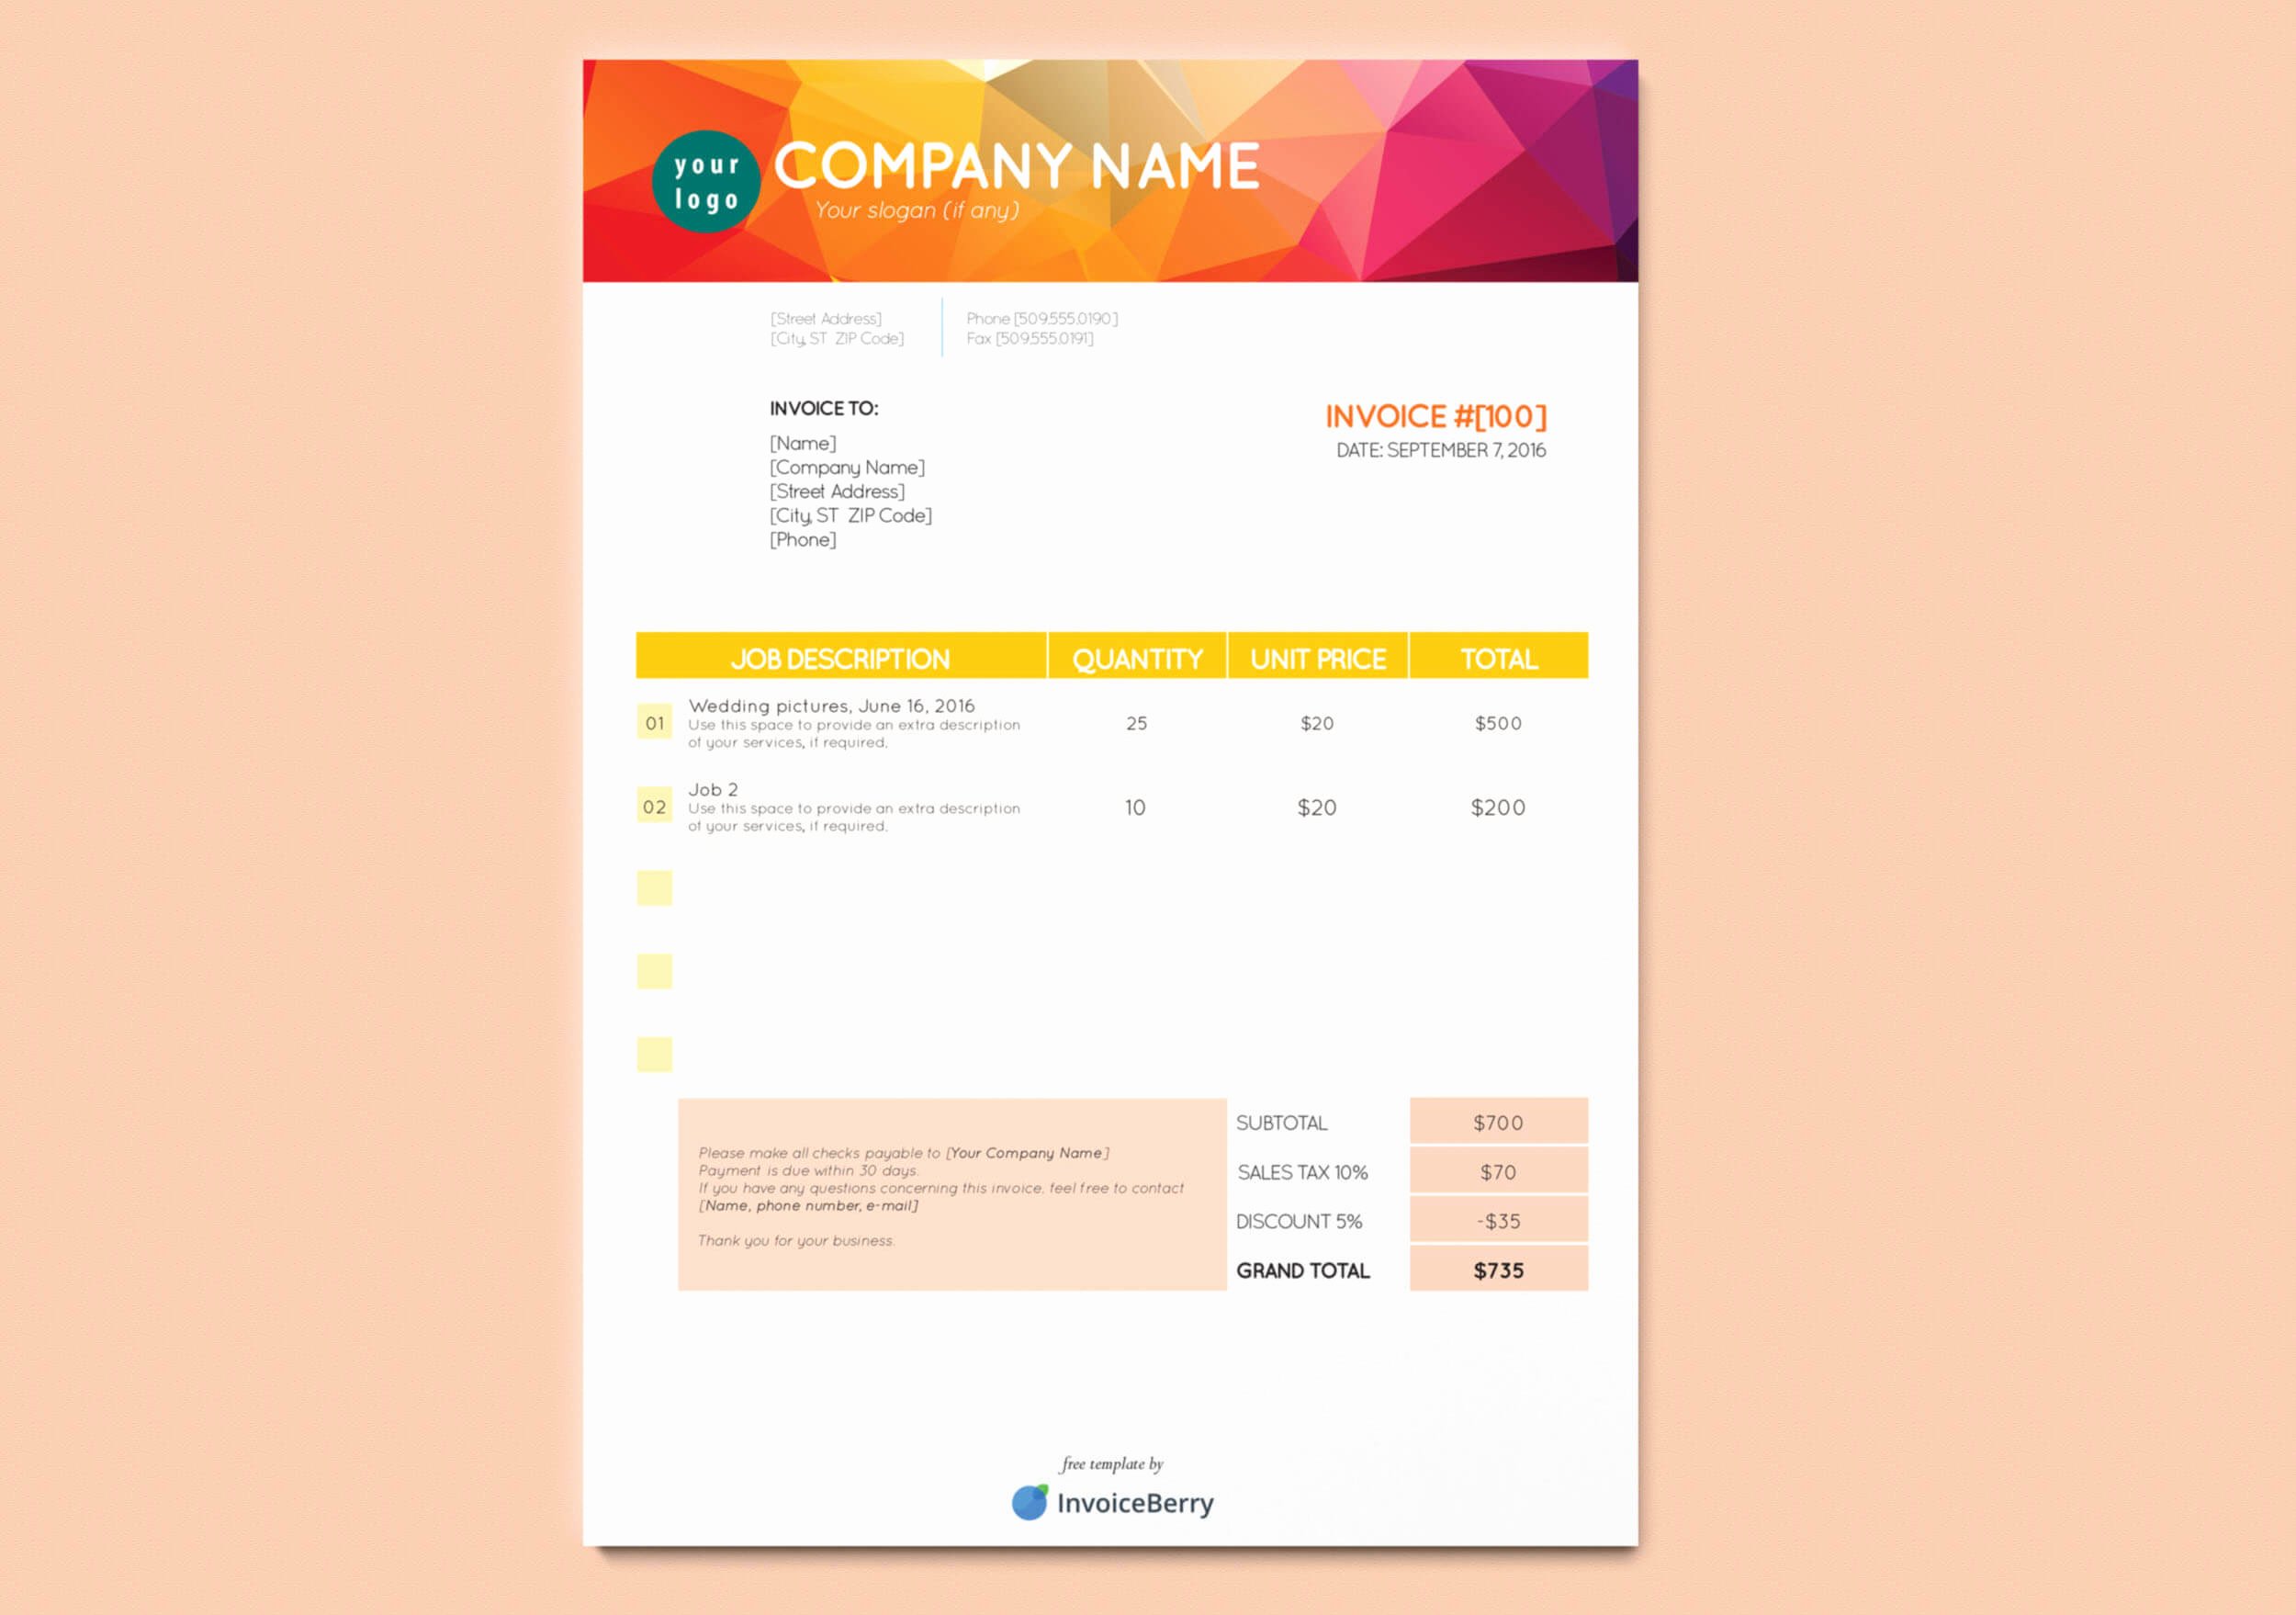 Free Indesign Invoice Template Lovely Free New Indesign Invoice Templates